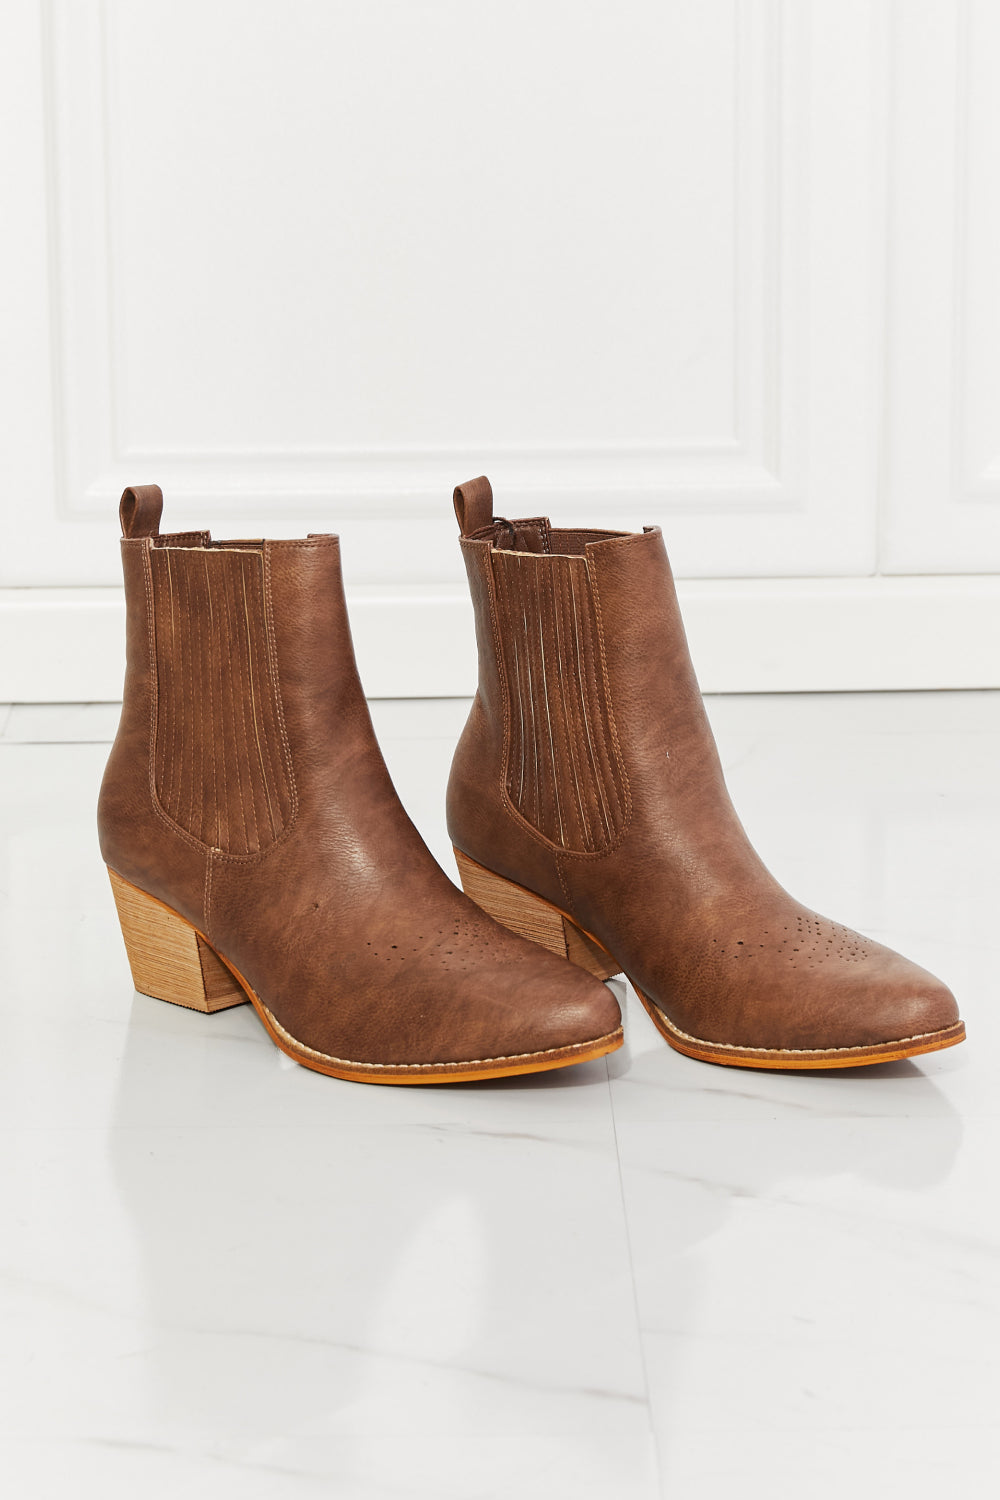 Lavender MMShoes Love the Journey Stacked Heel Chelsea Boot in Chestnut